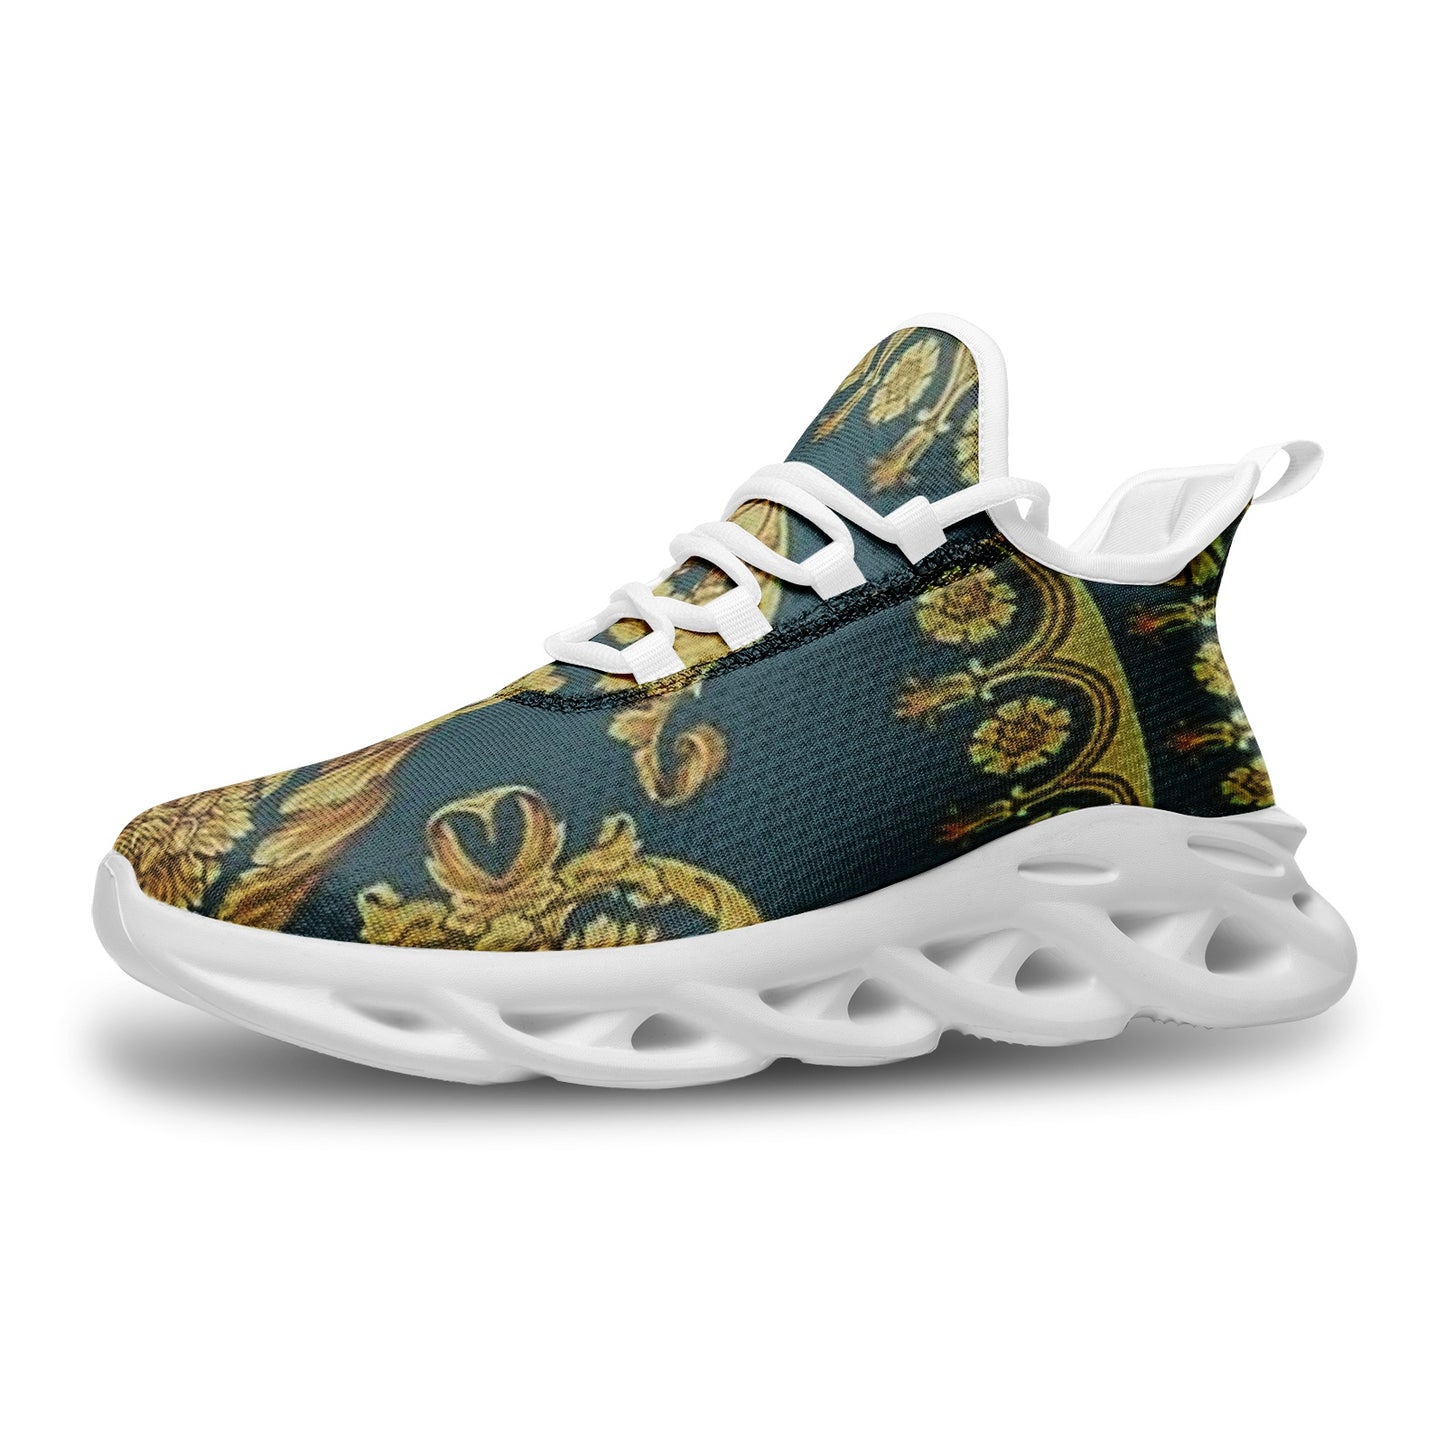 FZ African Print Unisex Bounce Mesh Knit Sneakers